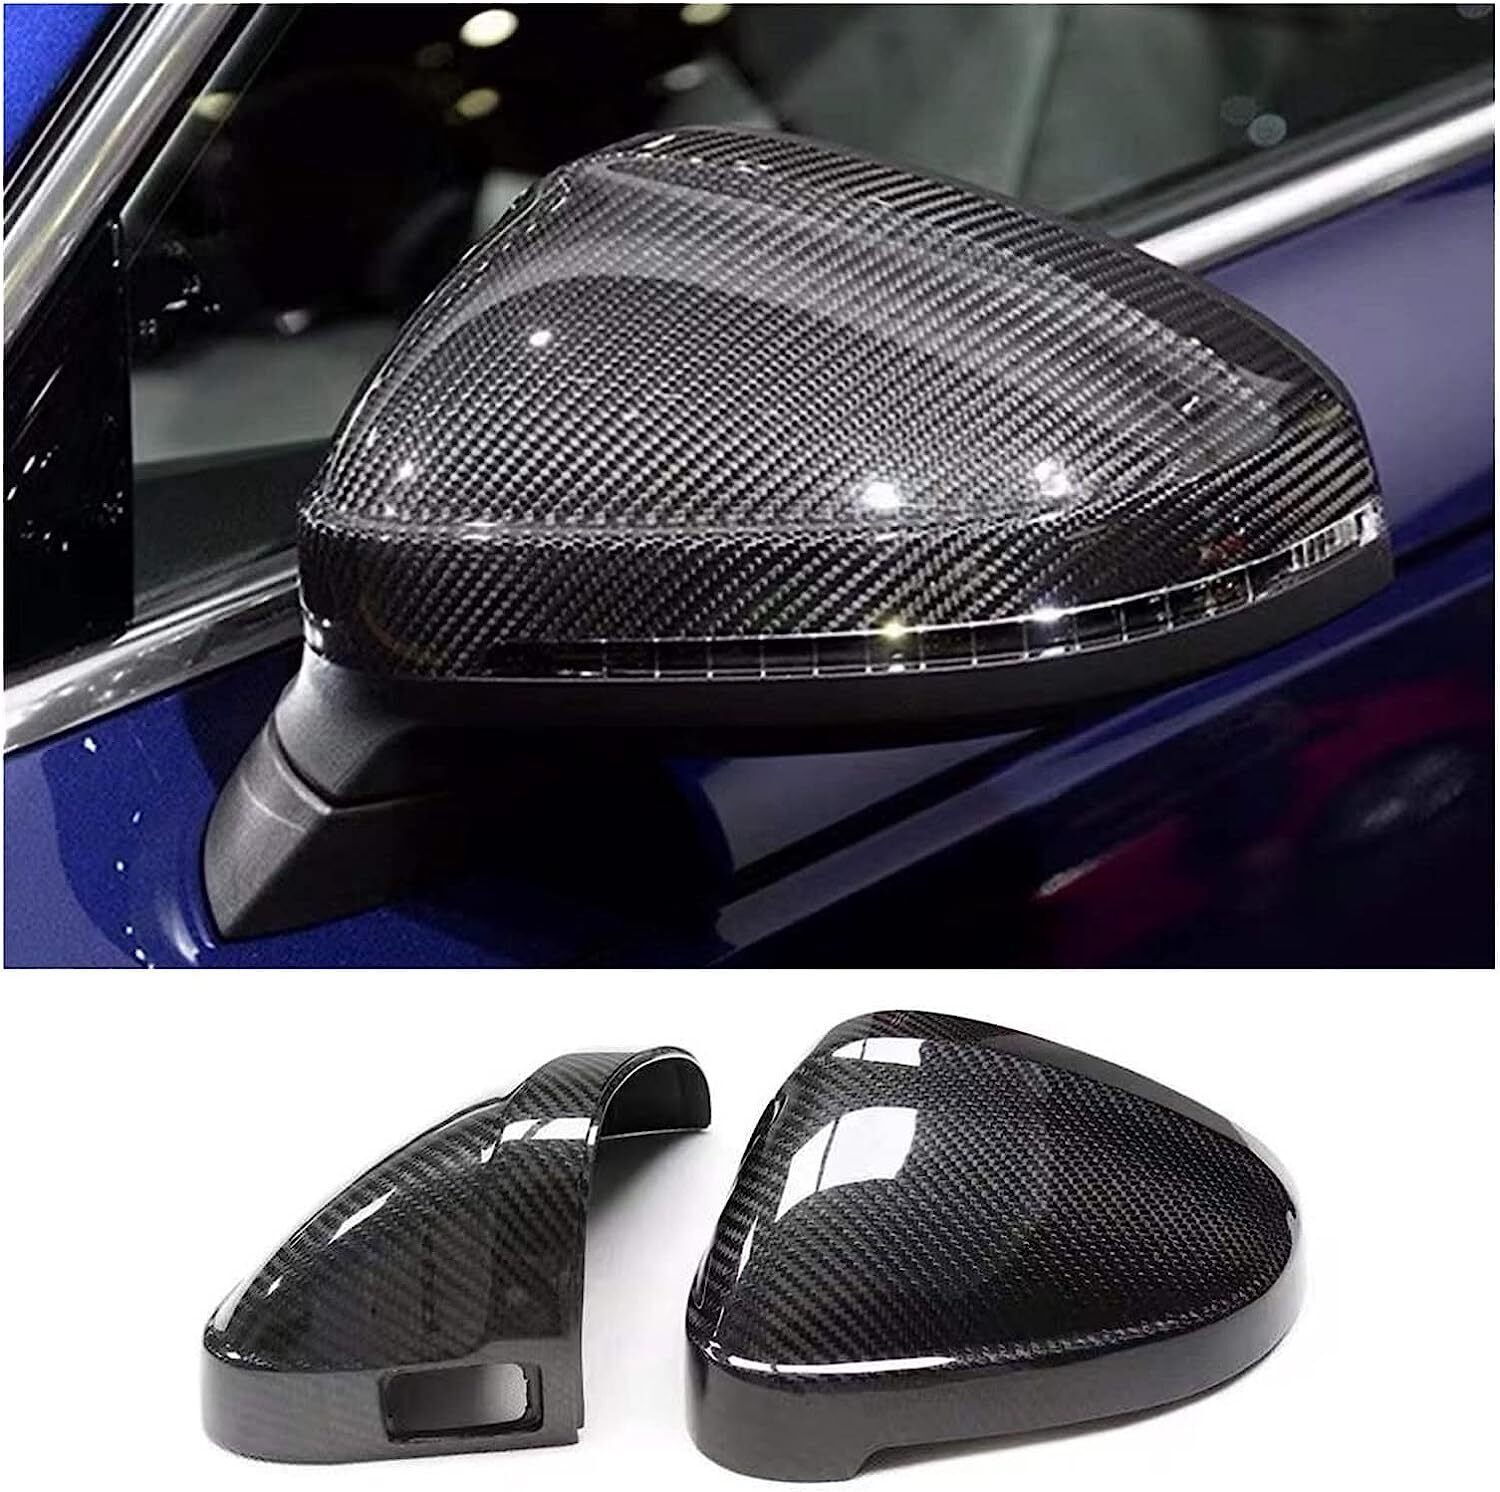 For Audi A4 B9 S4 A5 S5 RS5 2016+ Carbon Style Mirror Cover Caps W/ Lane Assist